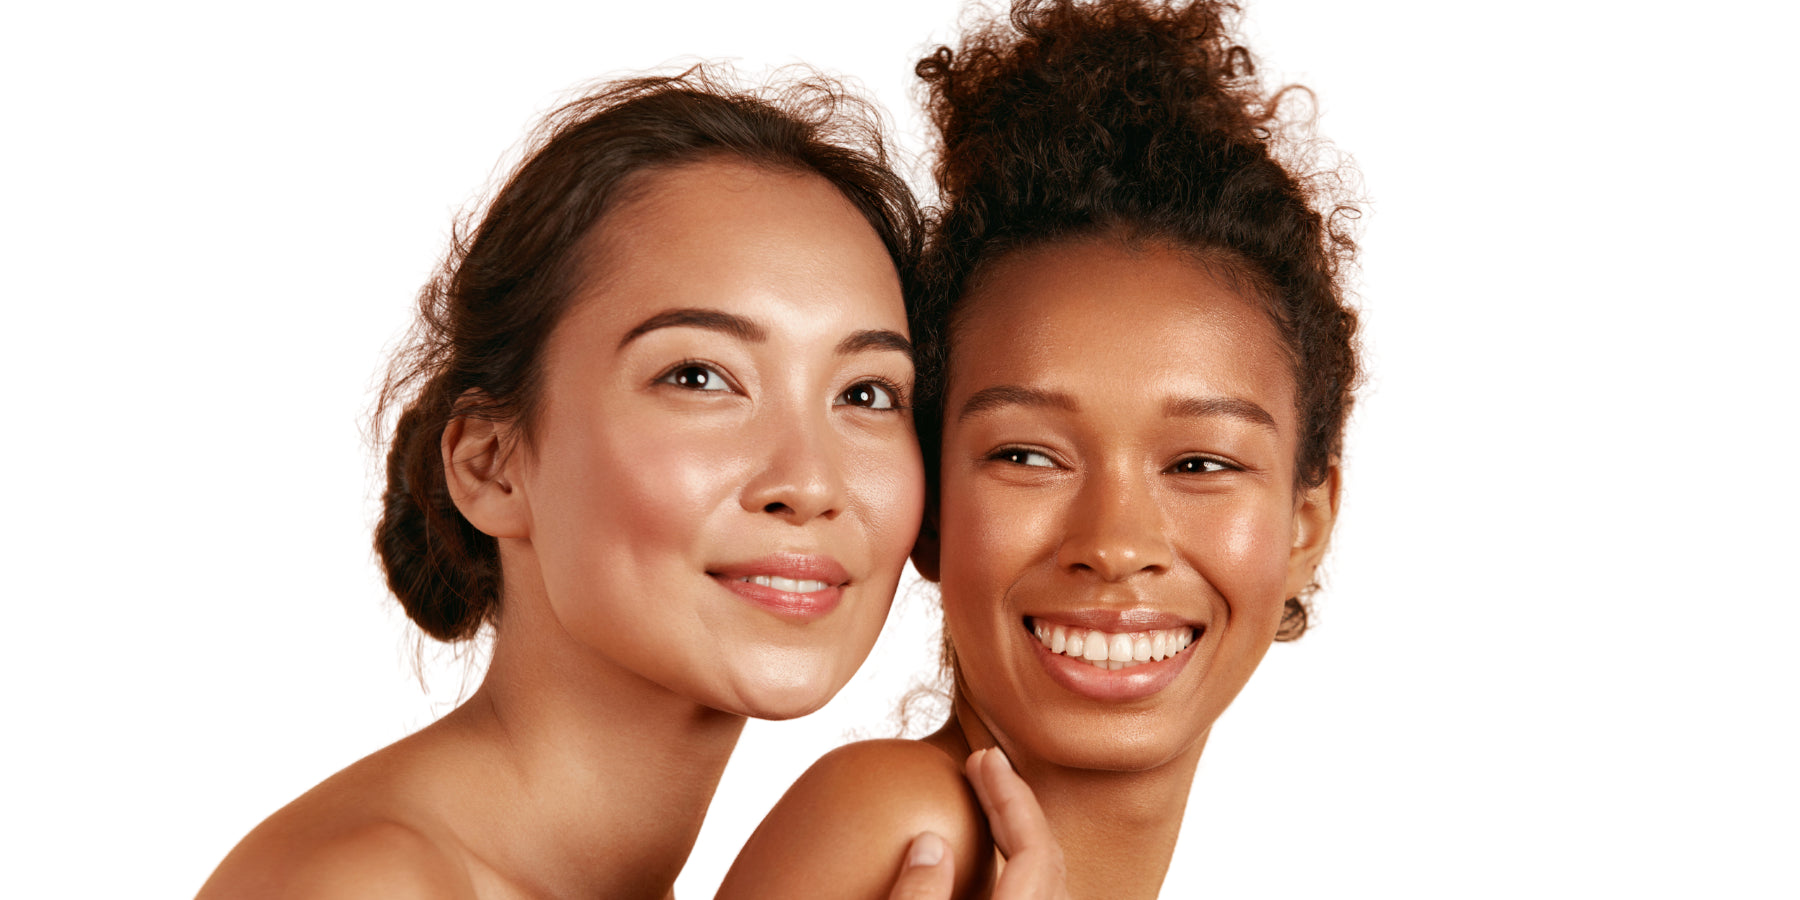 Image of two women with glowing skin smiling together. Click on link to go to navigate to online booking and schedule an appointment at any time from anywhere.